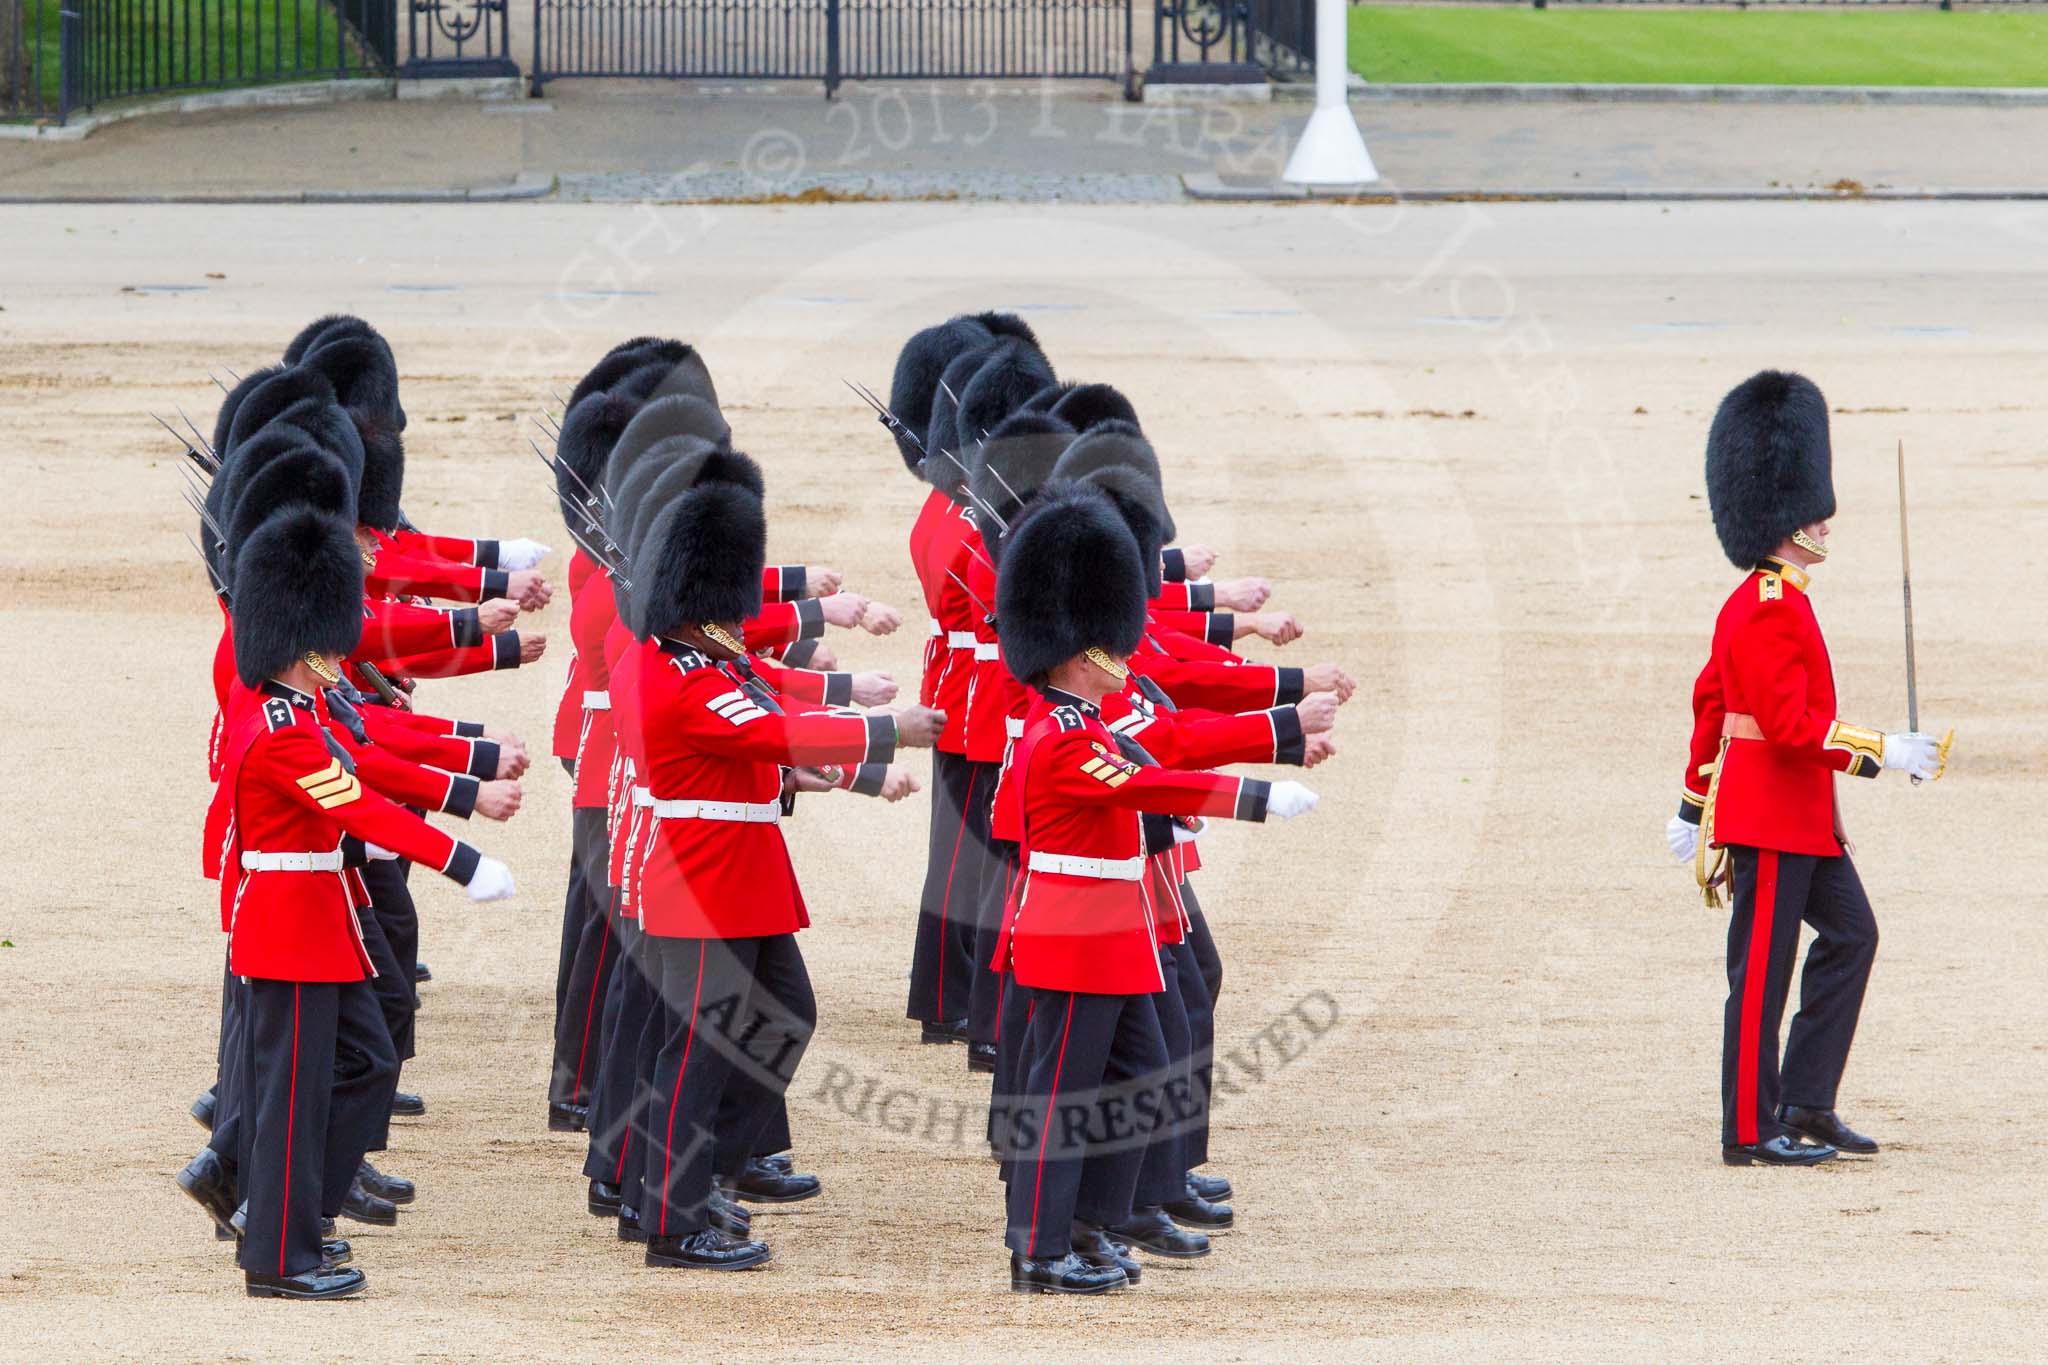 Trooping the Colour 2013: No. 2 Guard, 1st Battalion Welsh Guards, during the March Off, led by Lieutenant E C S Birrell. Image #833, 15 June 2013 12:11 Horse Guards Parade, London, UK